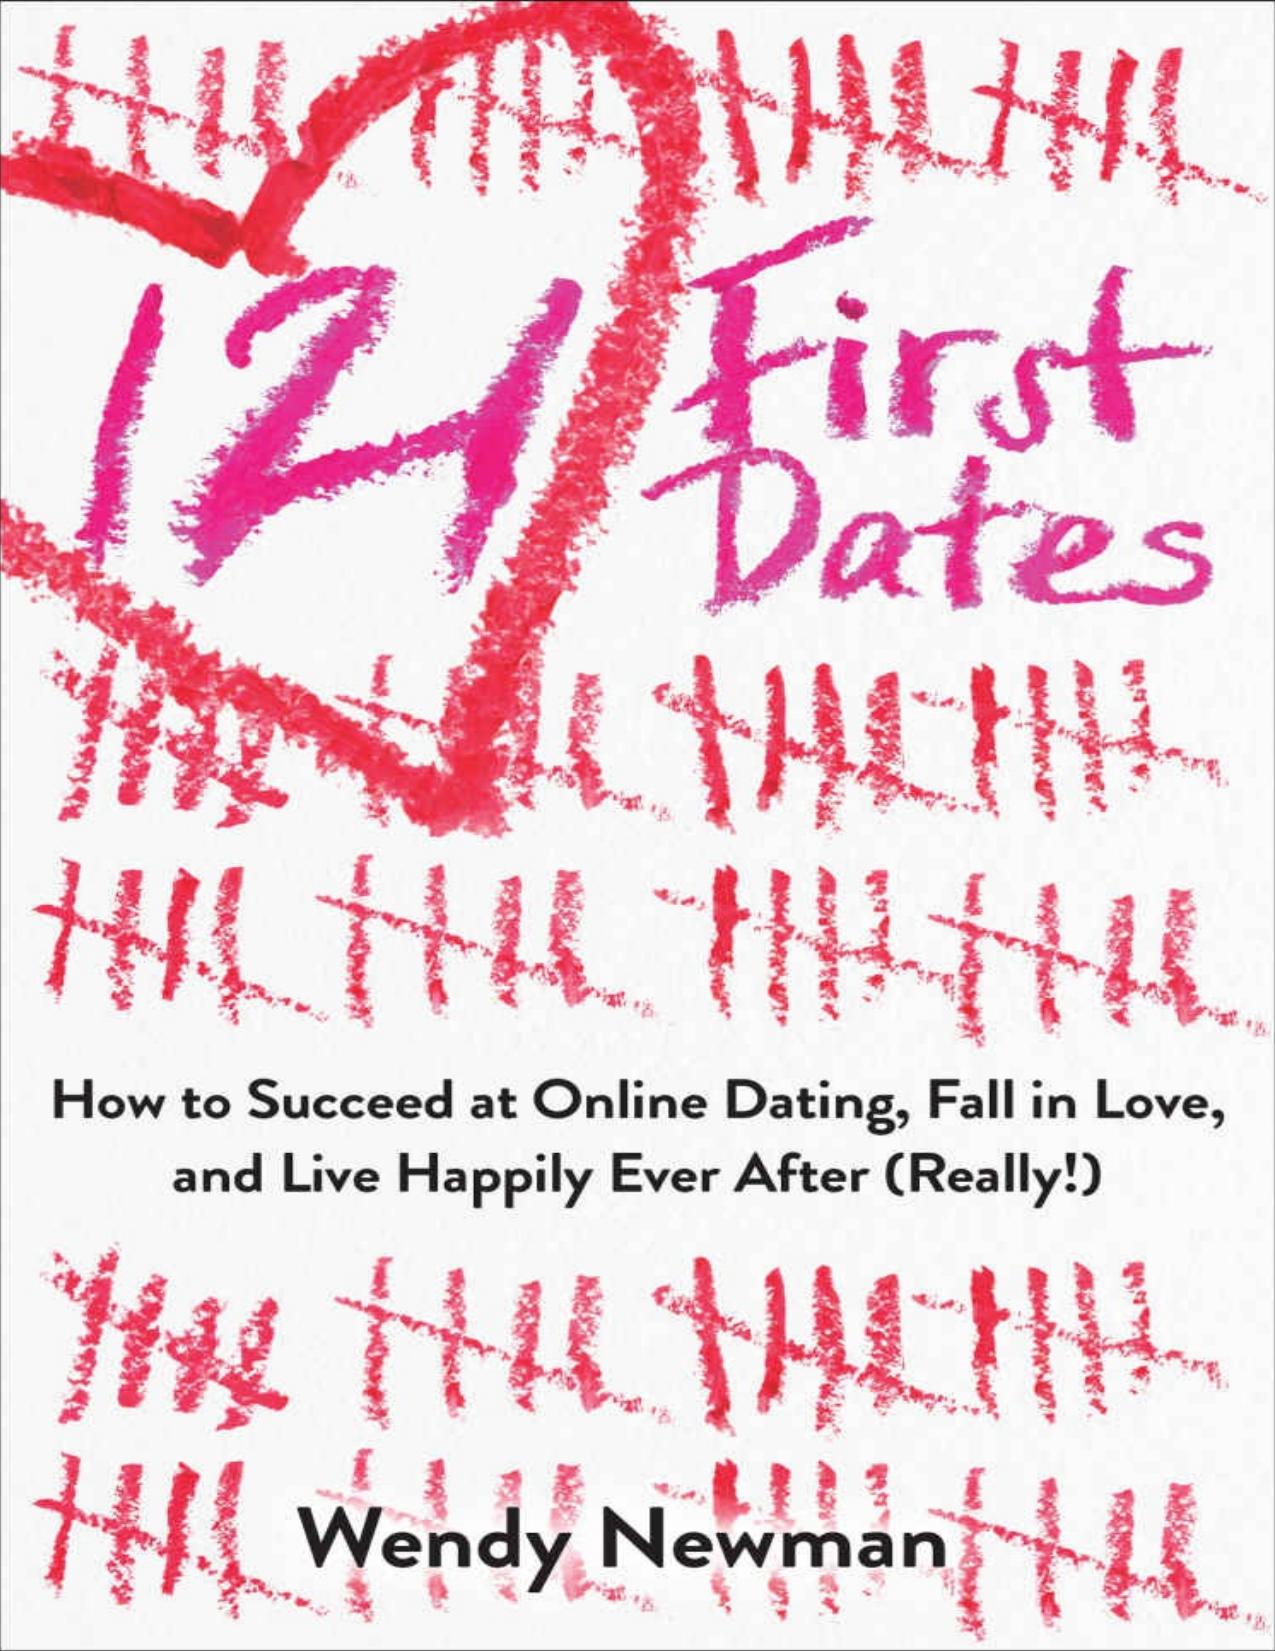 121 First Dates: How to Succeed at Online Dating, Fall in Love, and Live Happily Ever After (Really!) by Wendy Newman